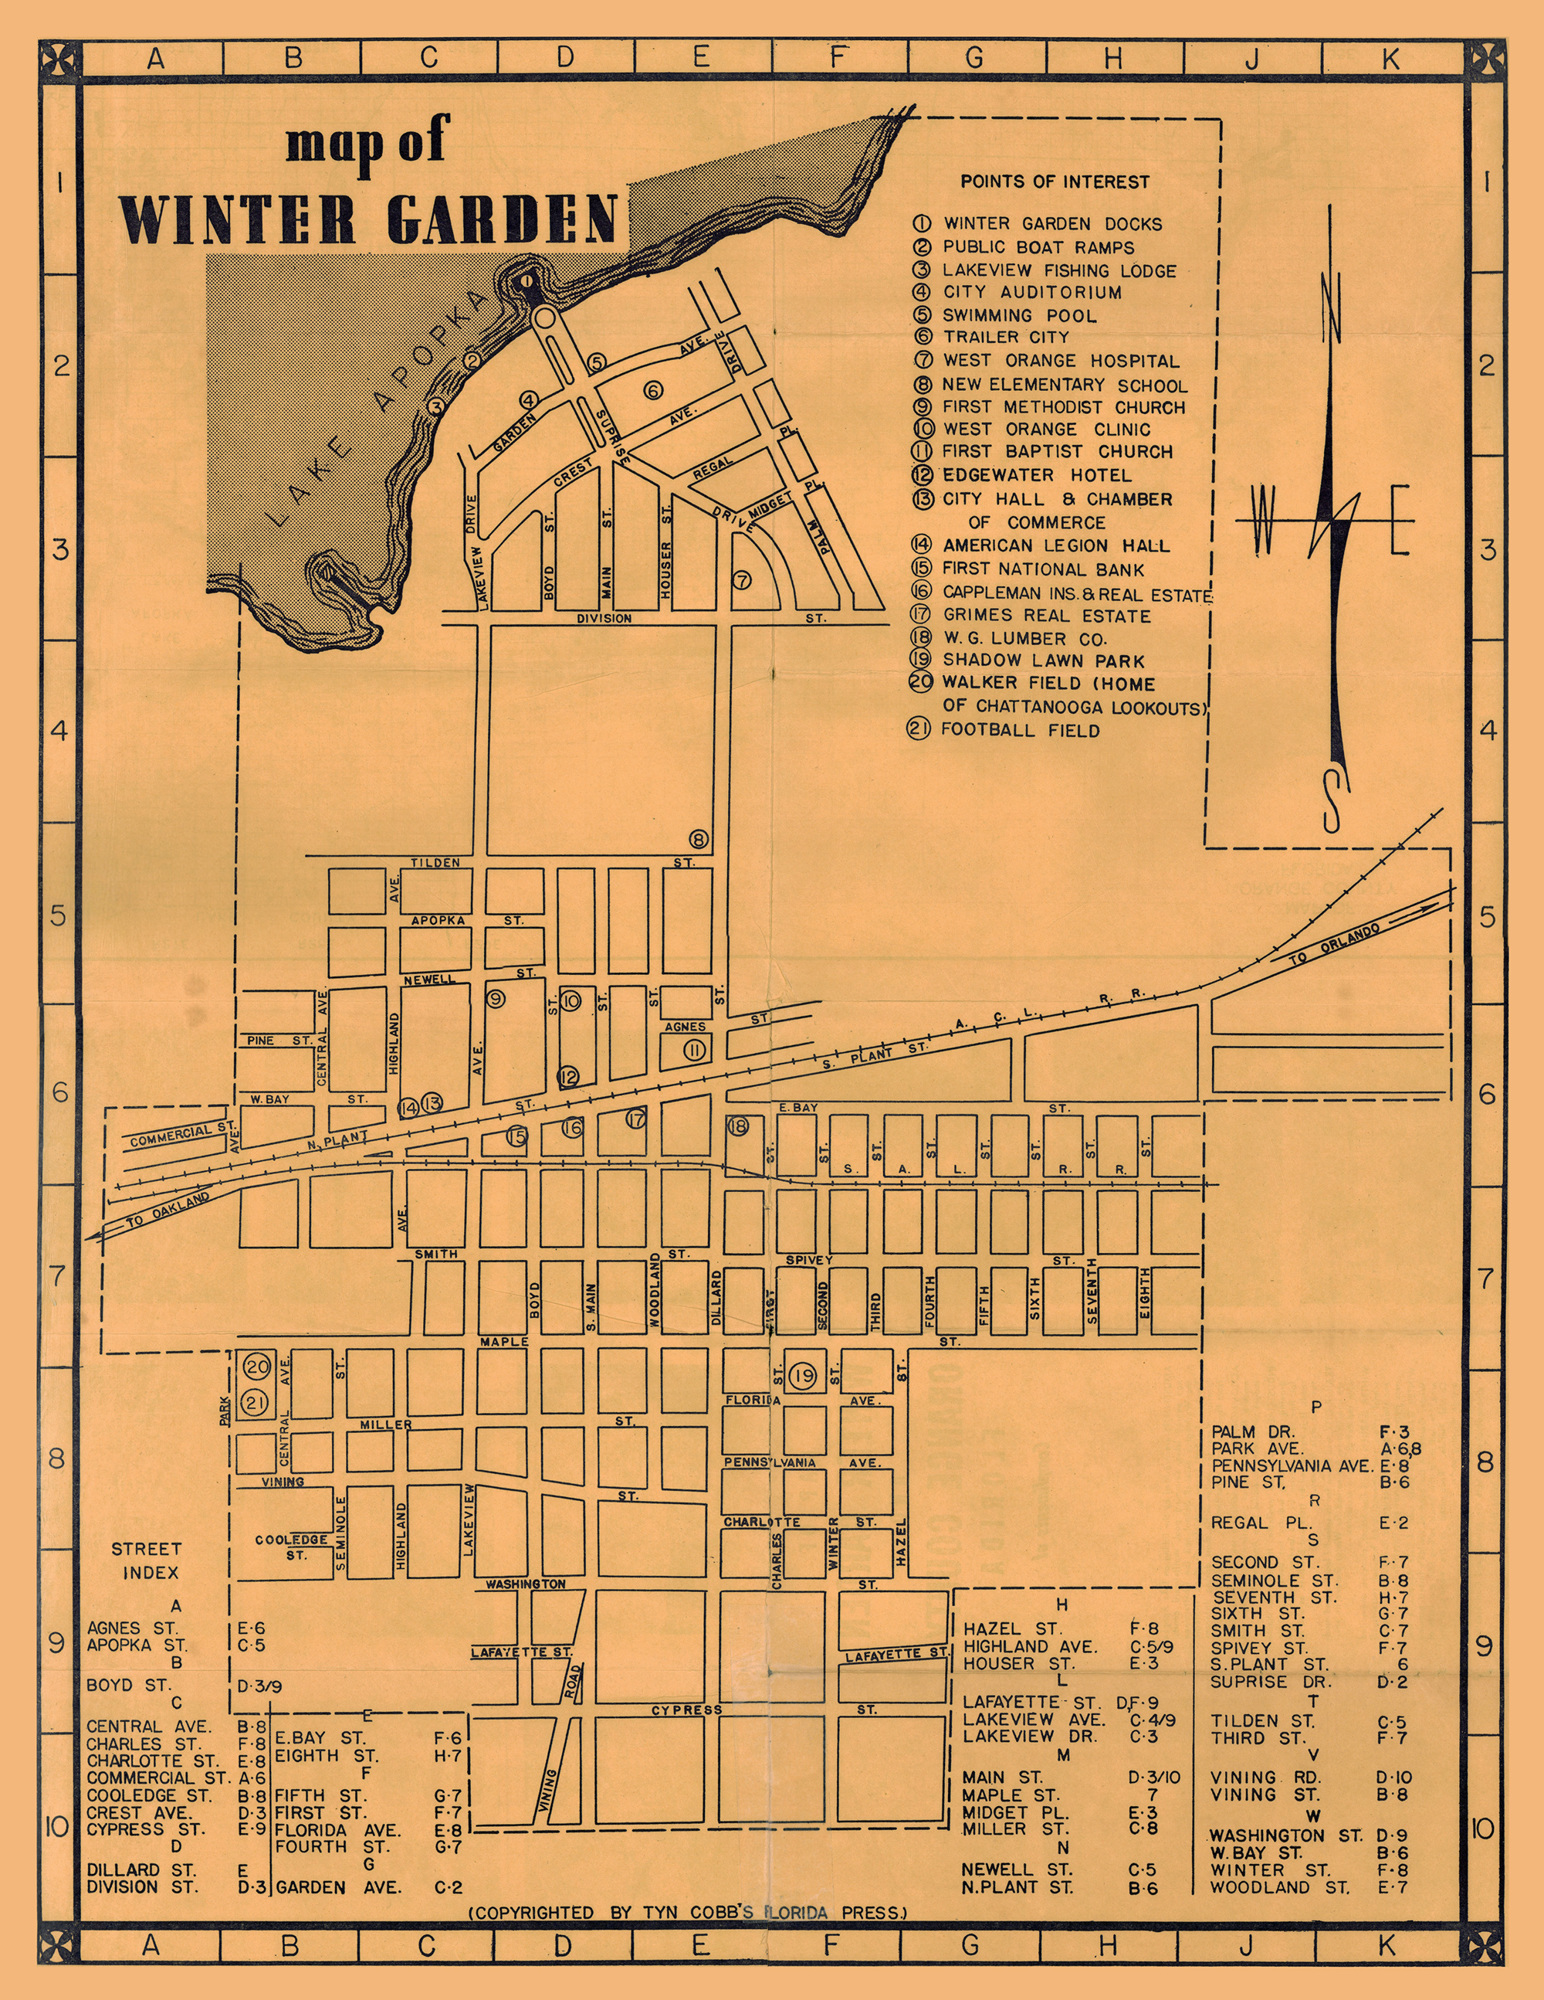 The Winter Garden Chamber of Commerce issued this city map in the 1950s. The backside included photographs of the city’s amenities.